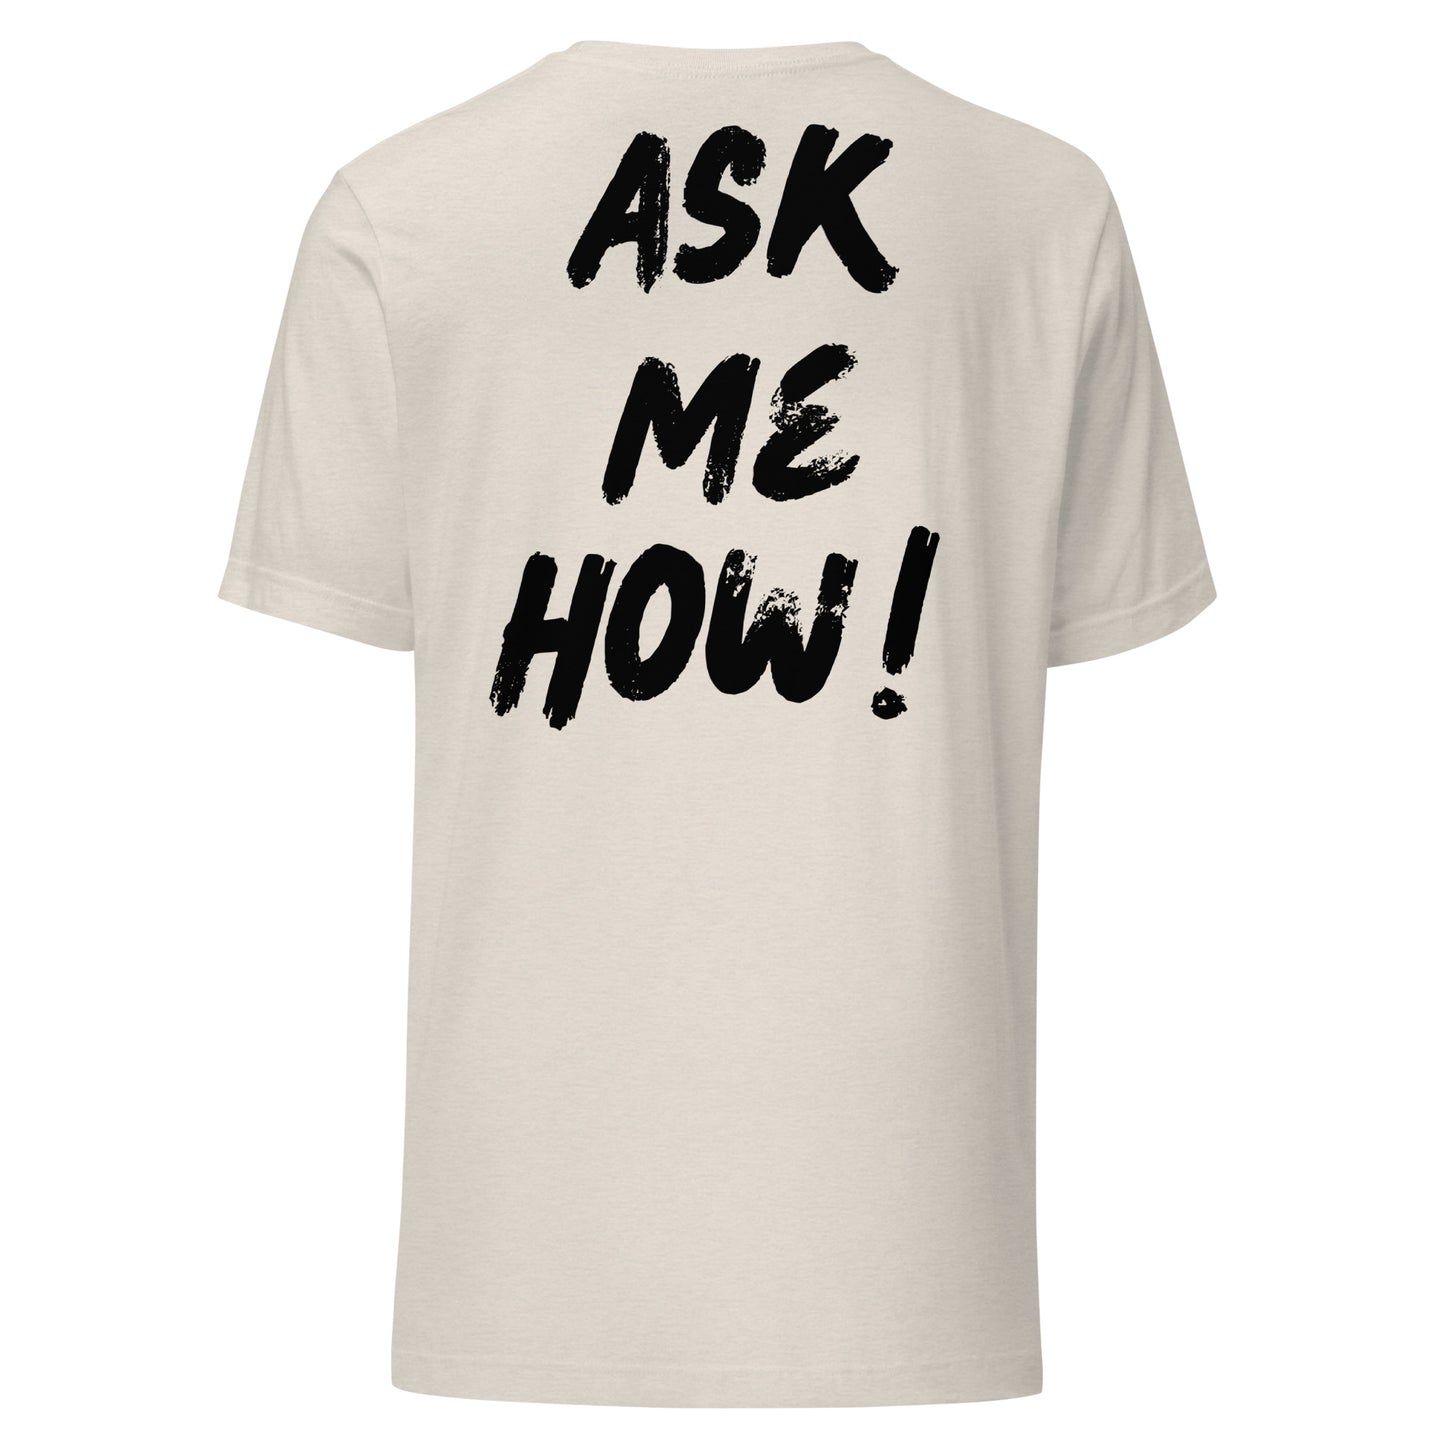 Ask Me (White and Black)